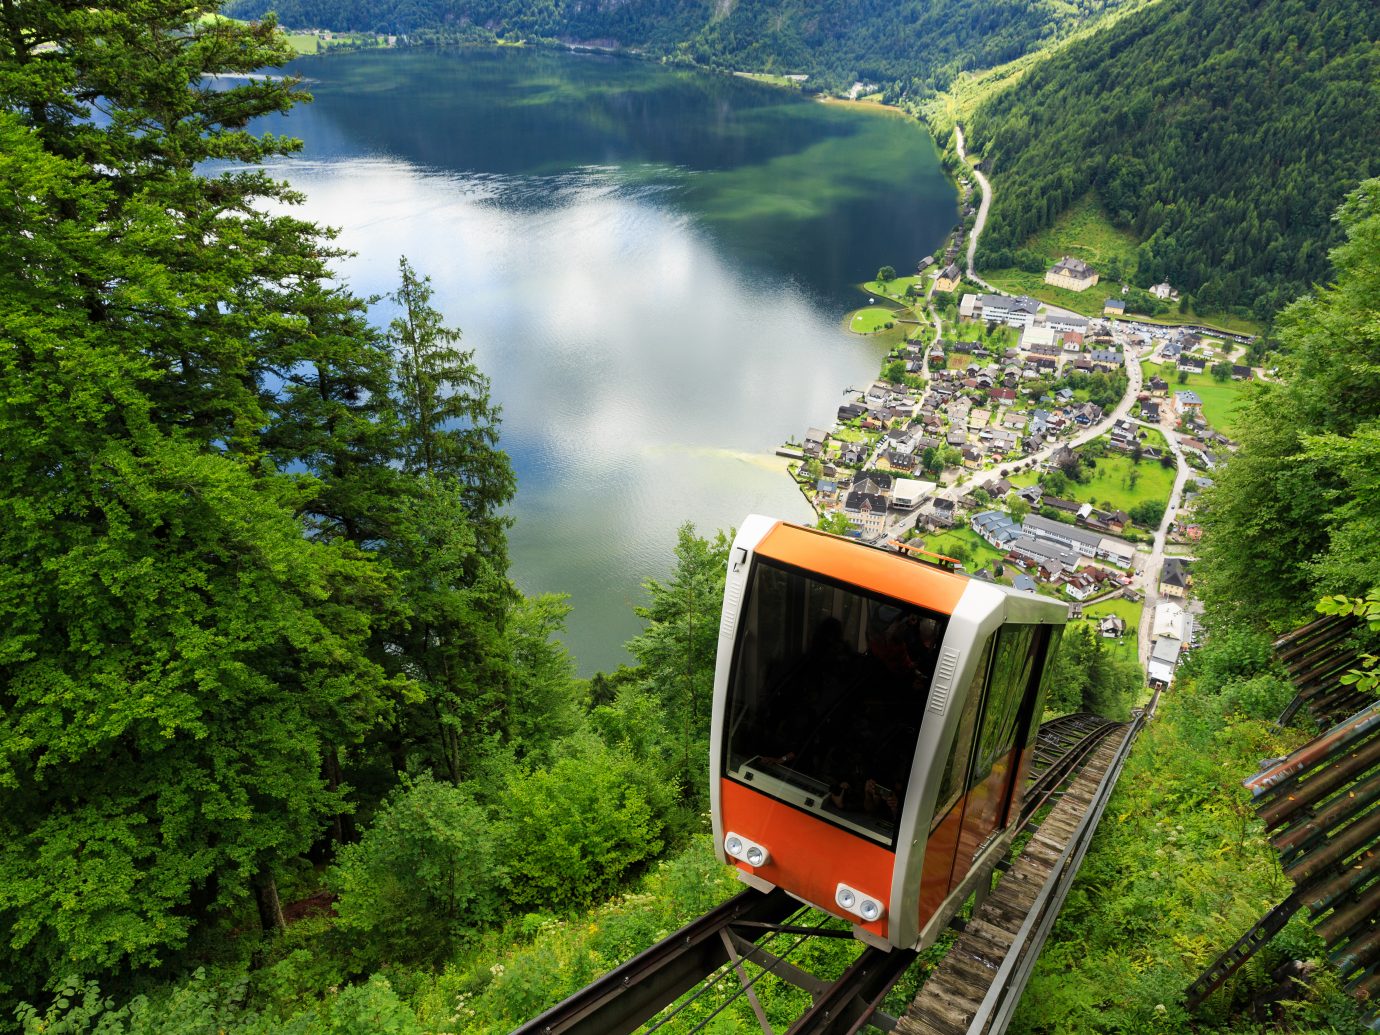 A cable car taking visitors up to Salzwelten mine in Hallstatt